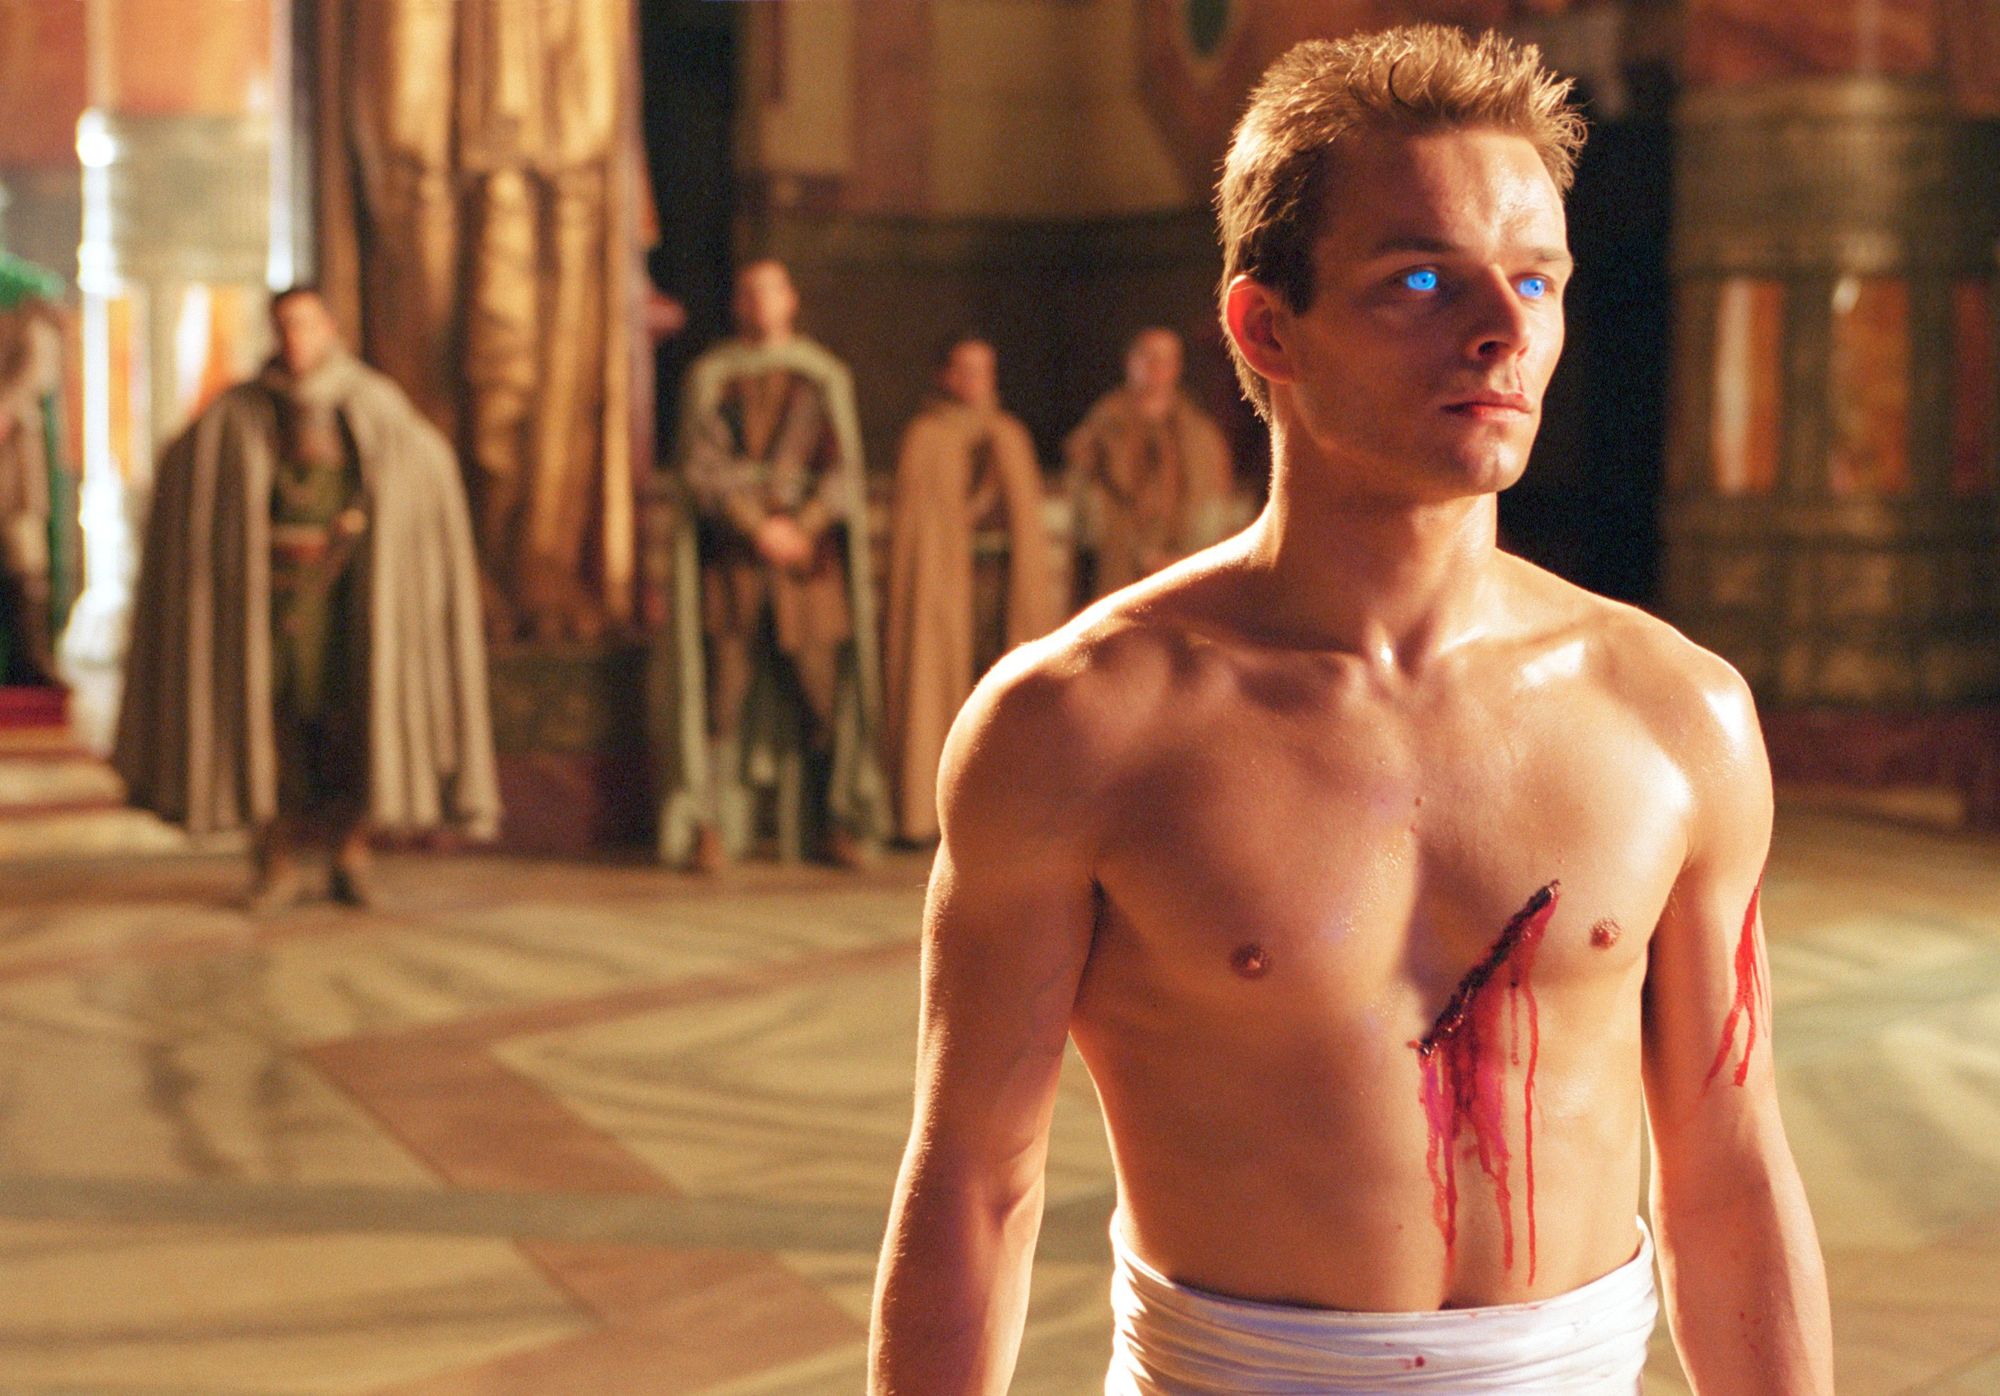 Paul Atreides (Alec Newman) stands in a throneroom, naked from the waist with a bleeding cut across his left breast.